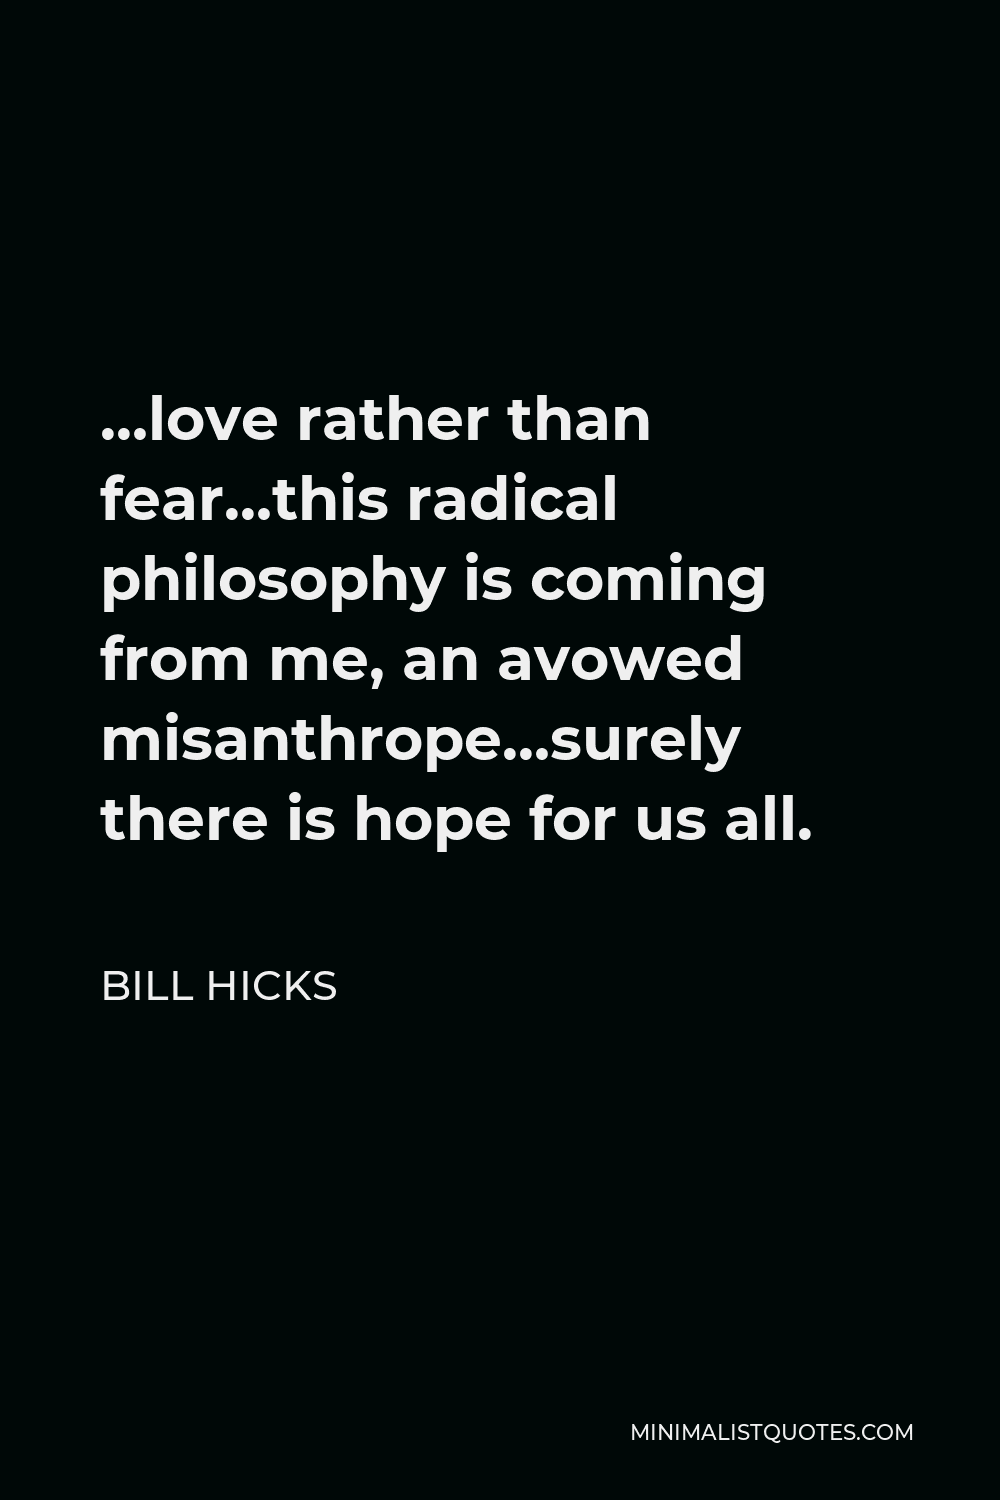 Bill Hicks Quote - …love rather than fear…this radical philosophy is coming from me, an avowed misanthrope…surely there is hope for us all.